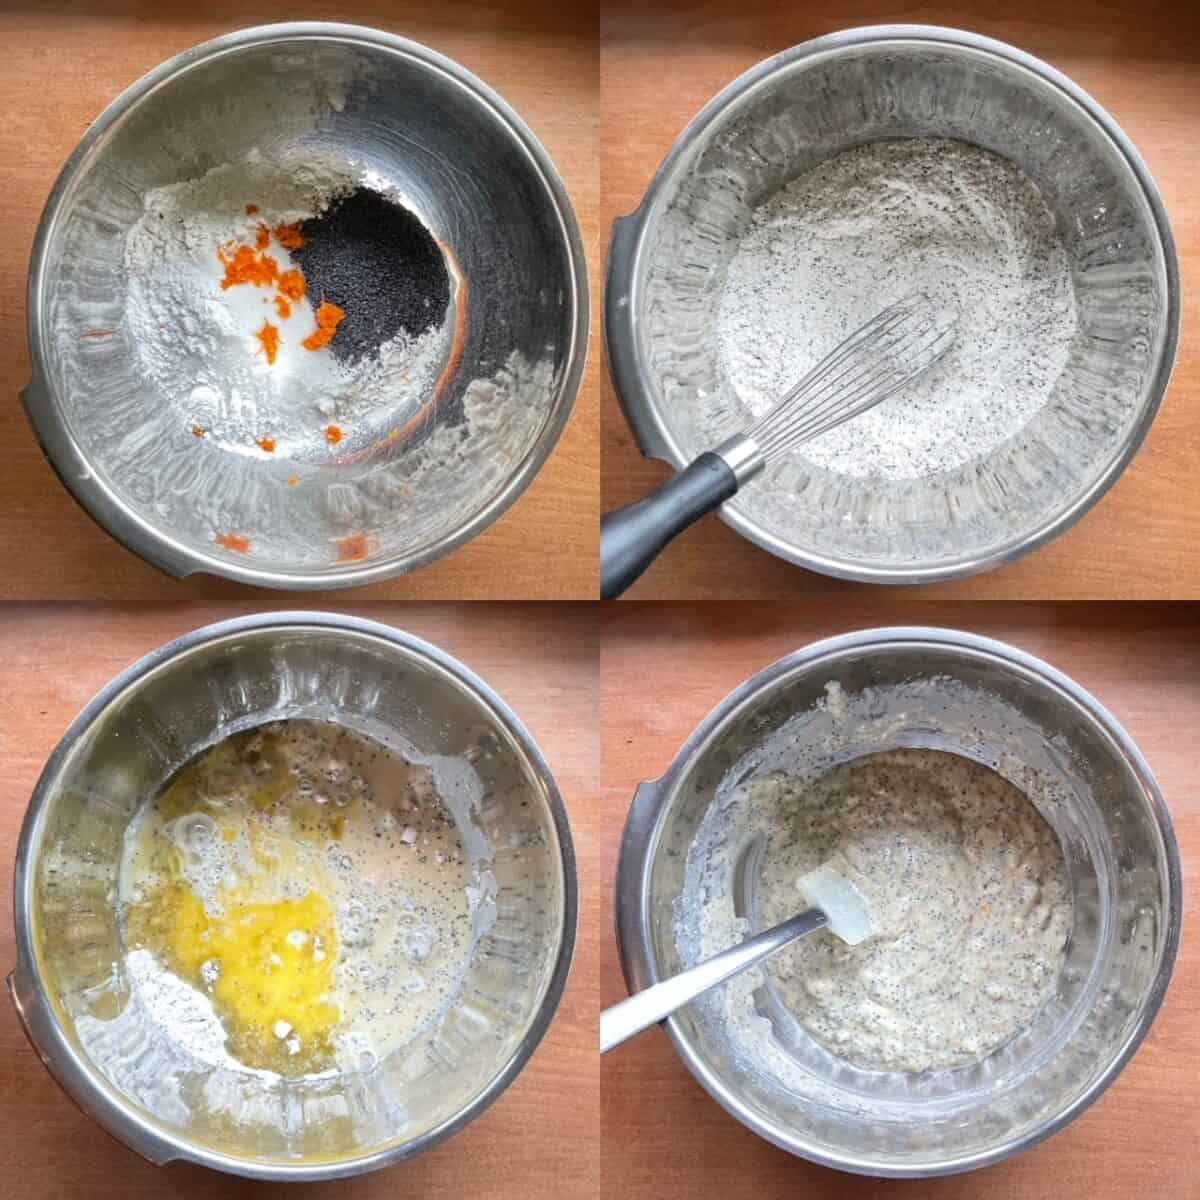 Four panels showing steps making orange and poppy seed muffins using the muffin method.